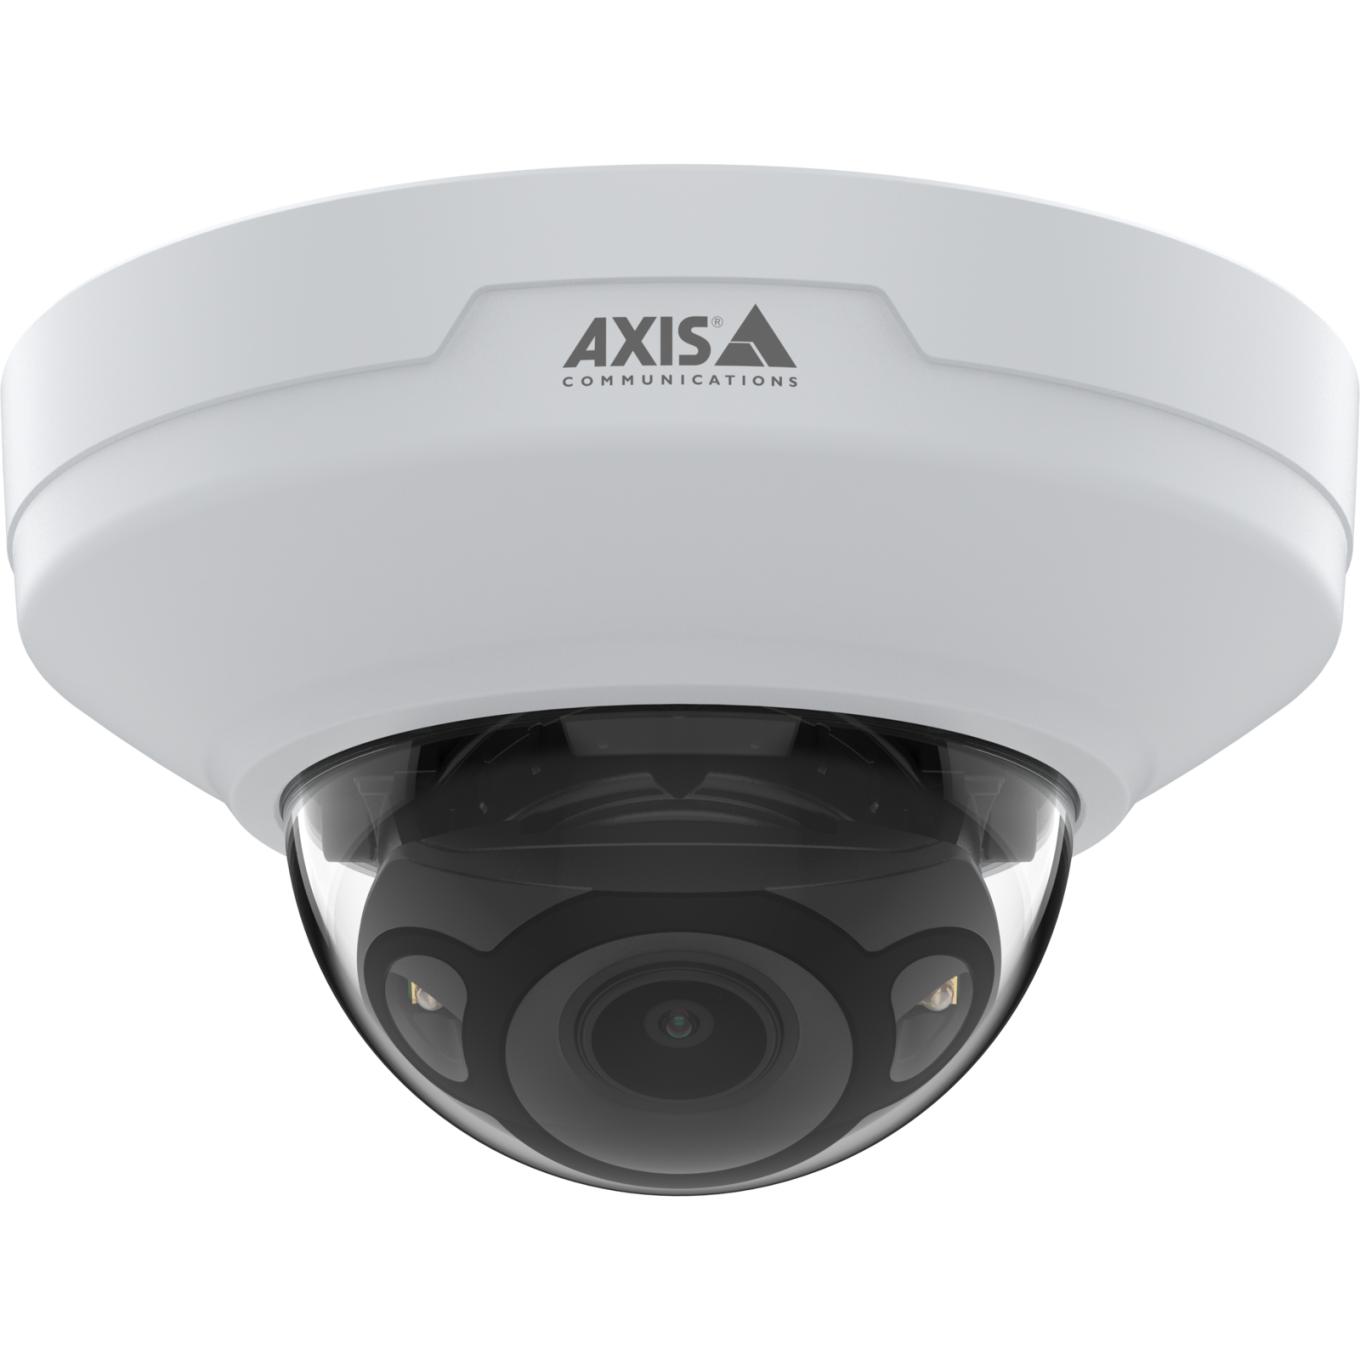 AXIS M4216-LV Dome Camera、天井設置、正面から見た図